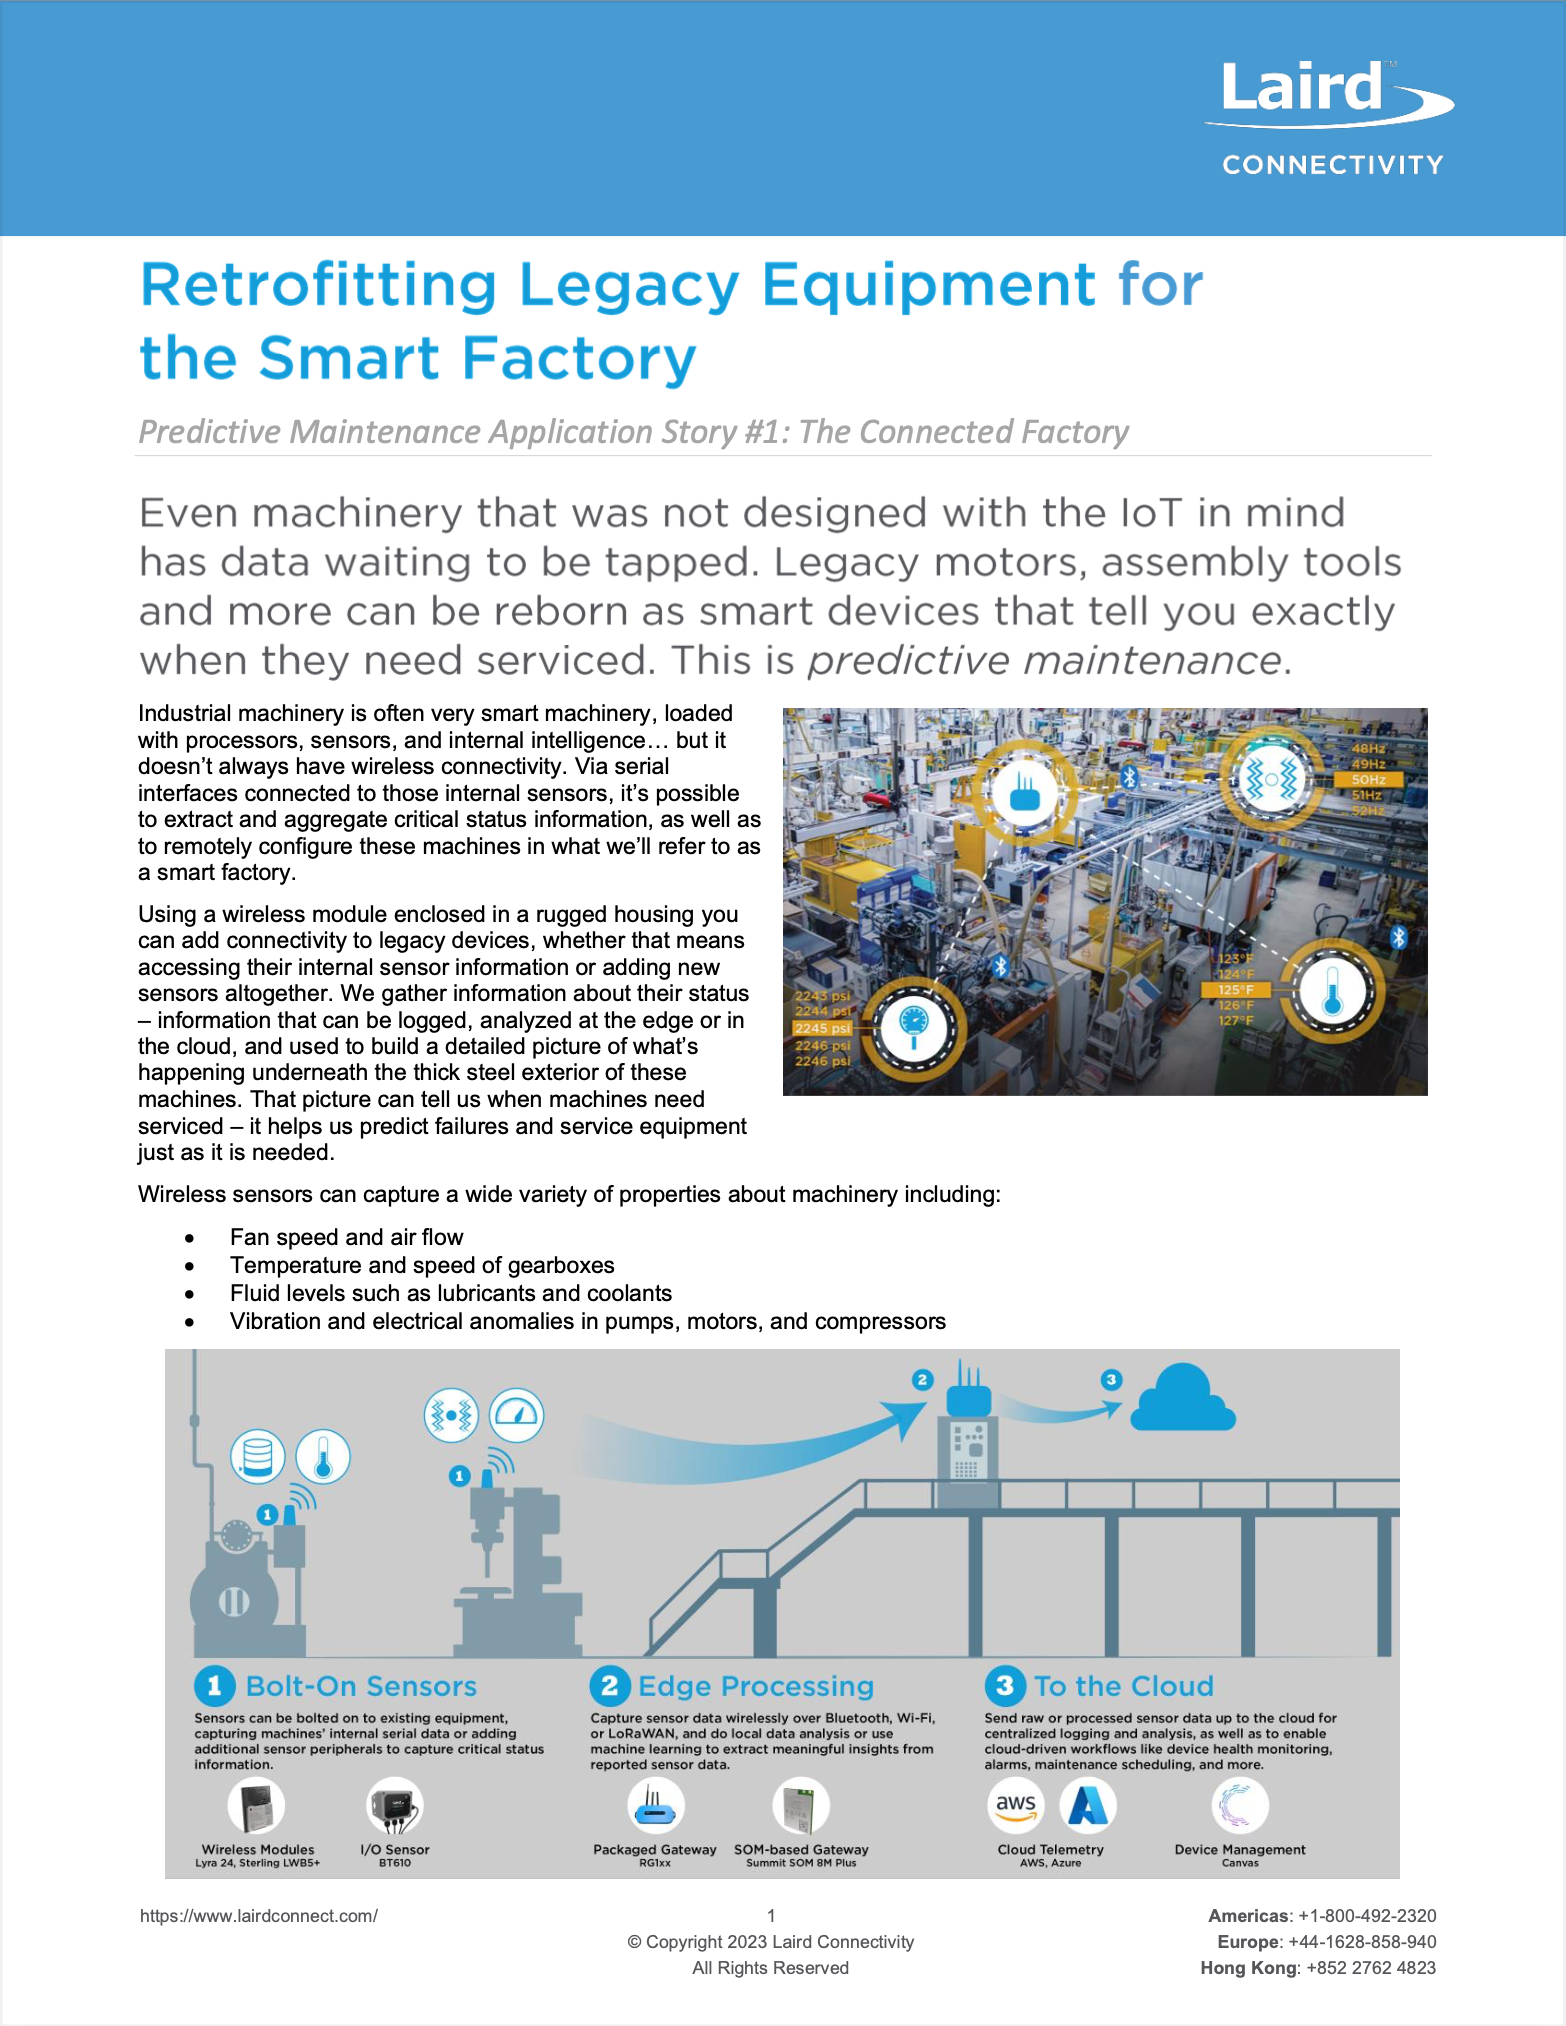 Retrofitting Legacy Equipment for the Smart Factory